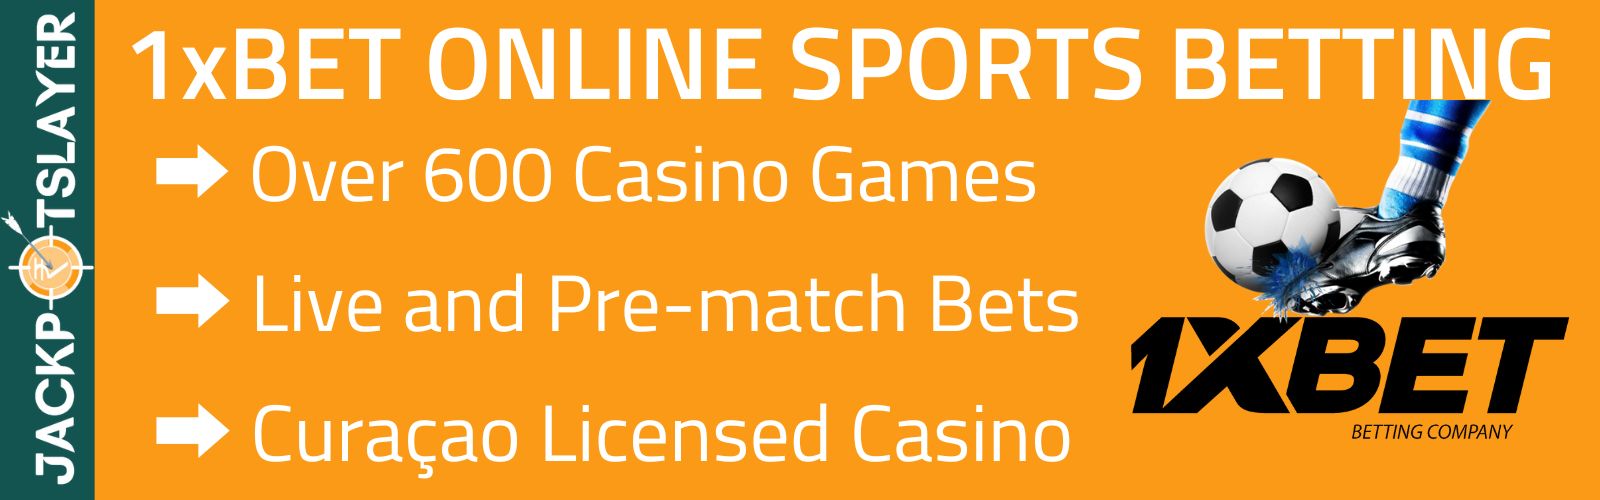 1xBet Online Casino and Sports Betting